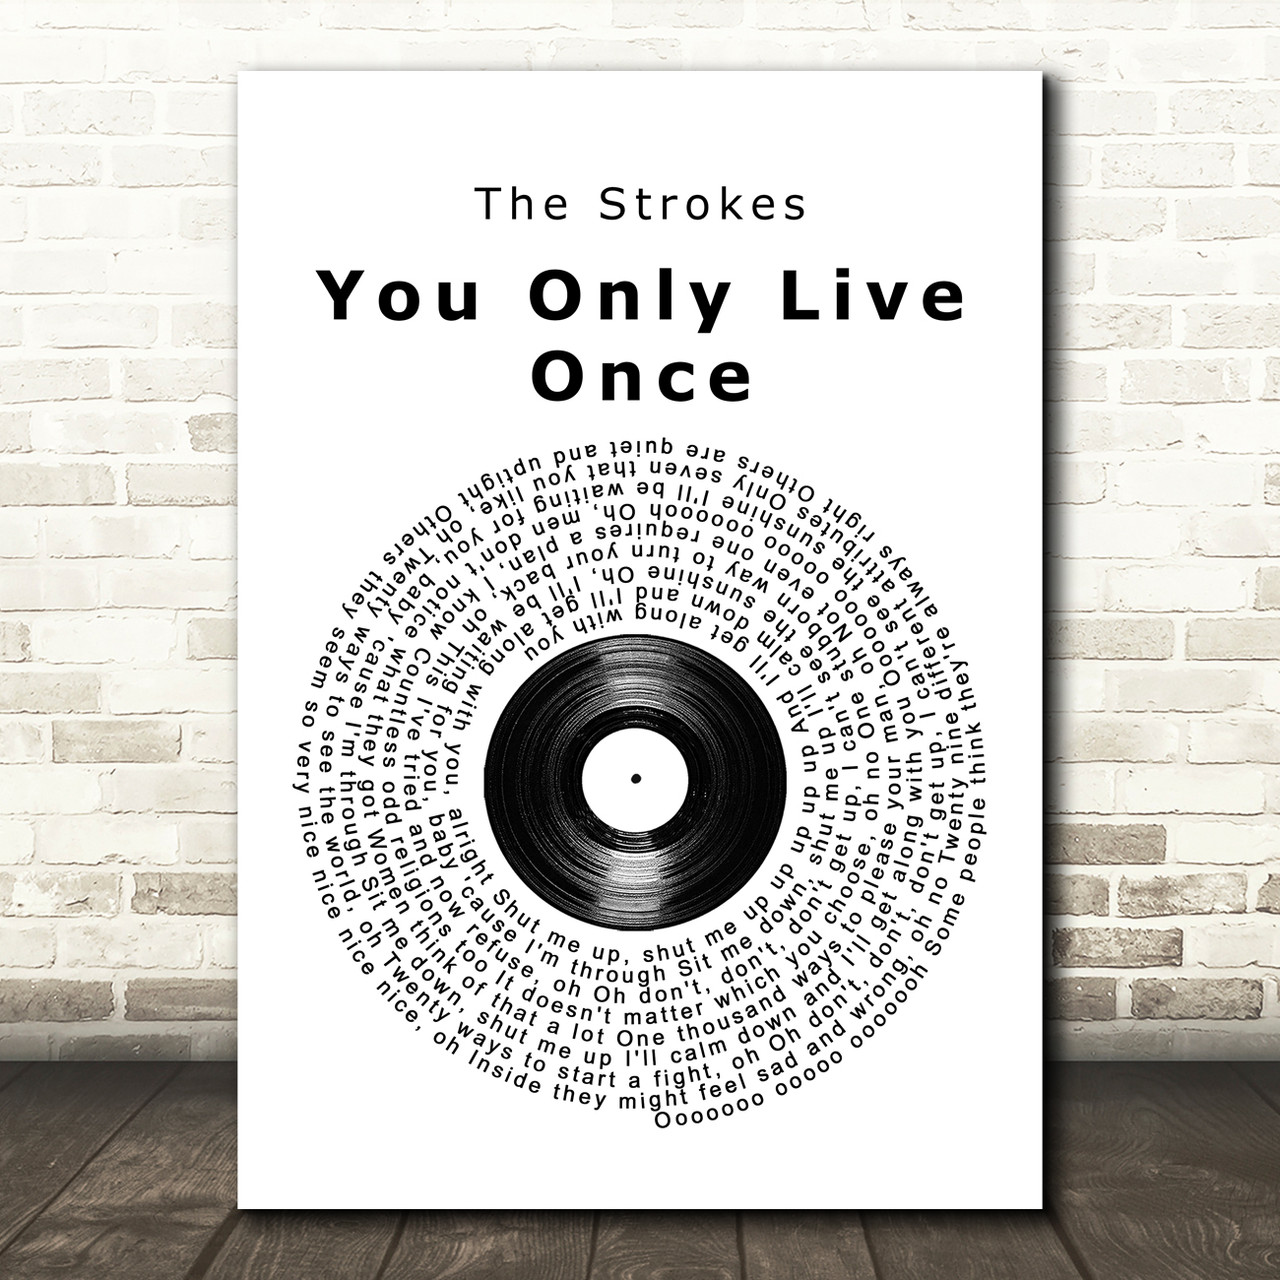 Minimal artwork for the song “You Only Live Once” inspired by the